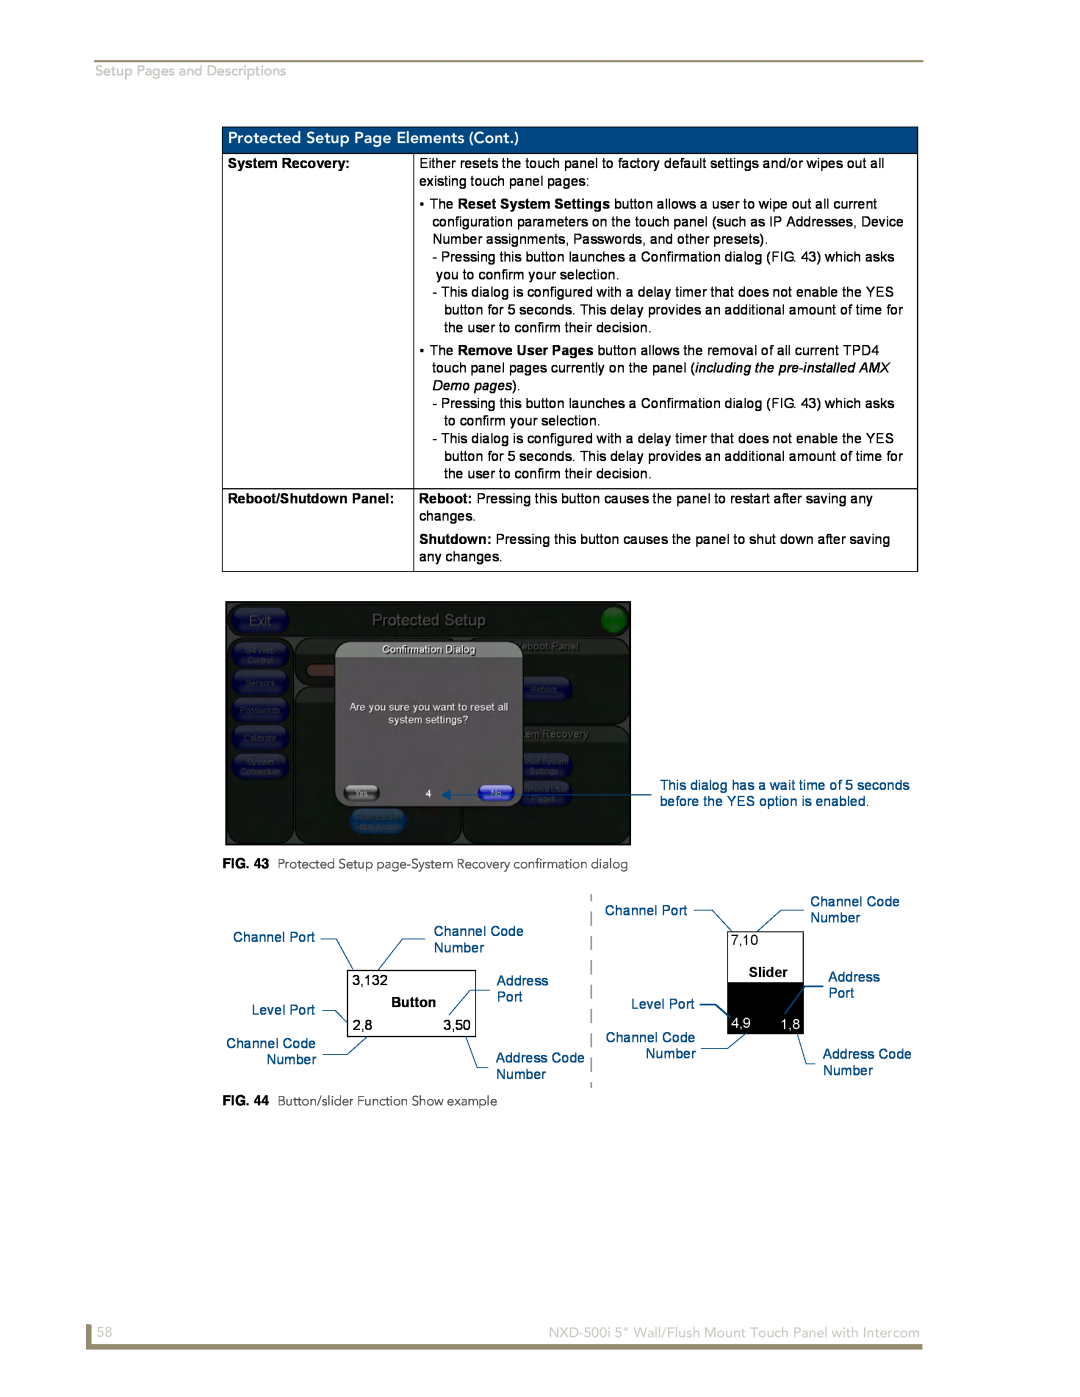 AMX NXD-500i Protected Setup Page Elements Cont, Setup Pages and Descriptions, Demo pages, Channel Port, Channel Code 